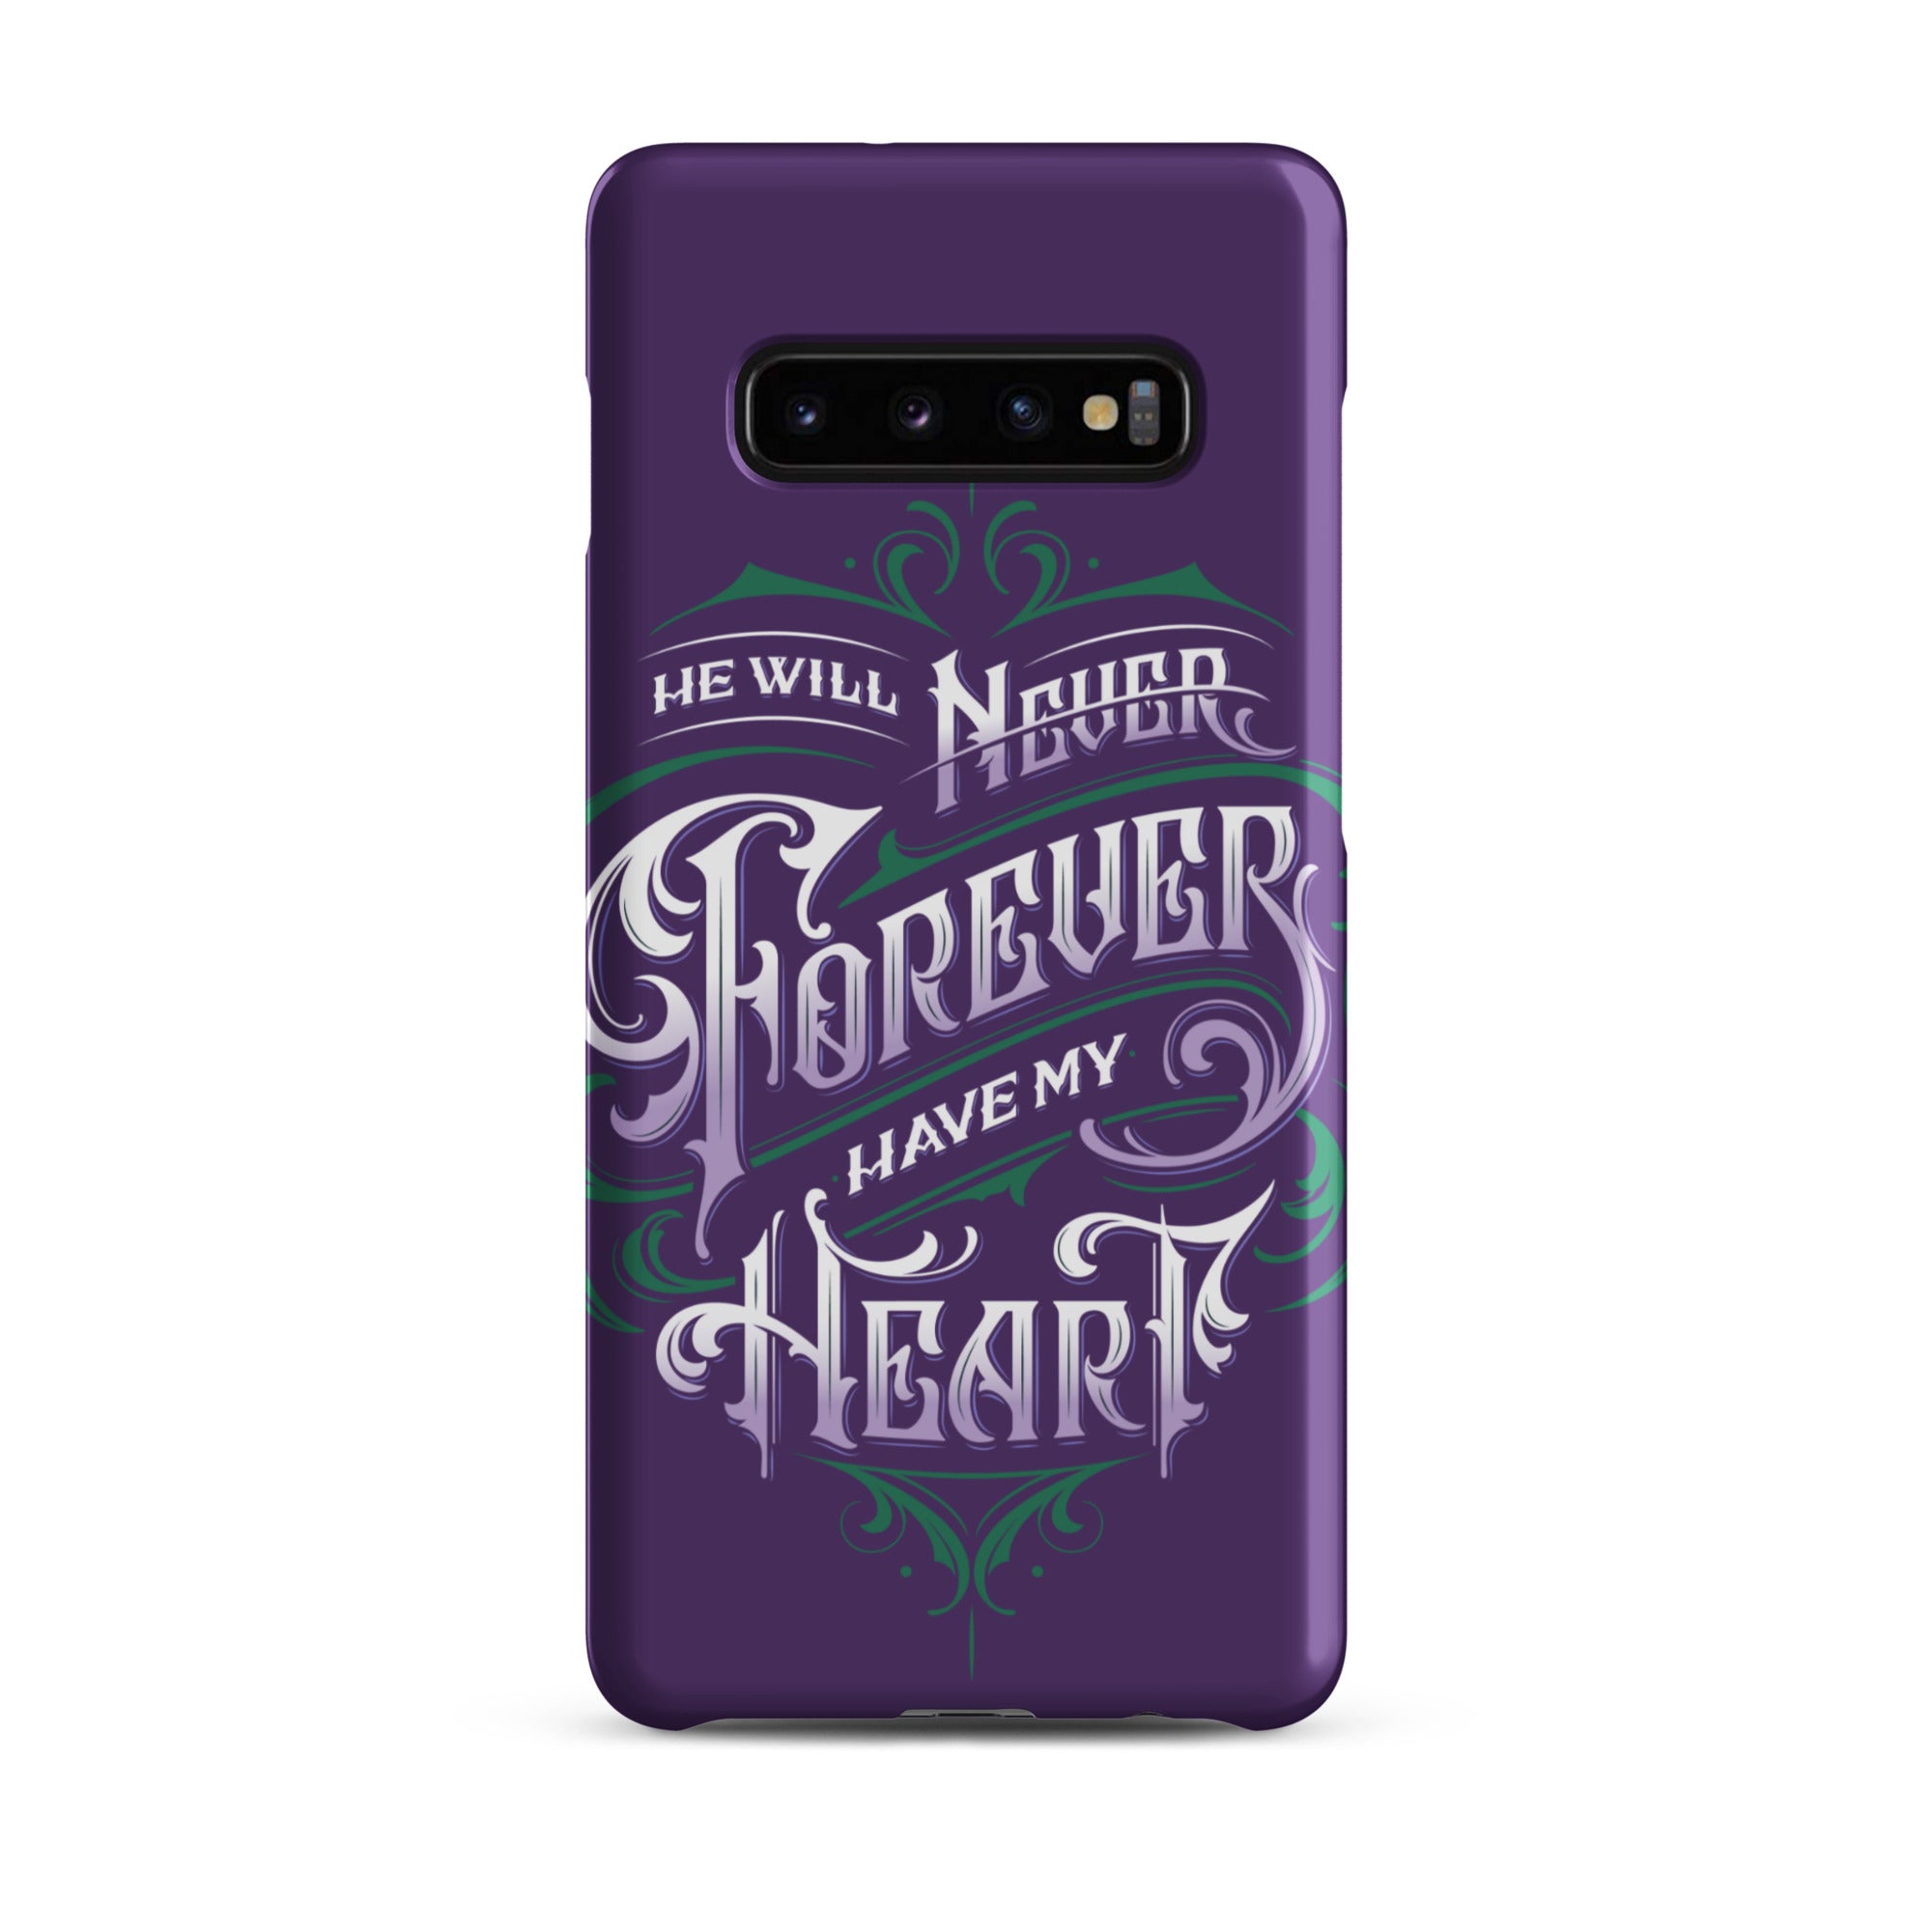 "He will never have my heart" Samsung Phone Case